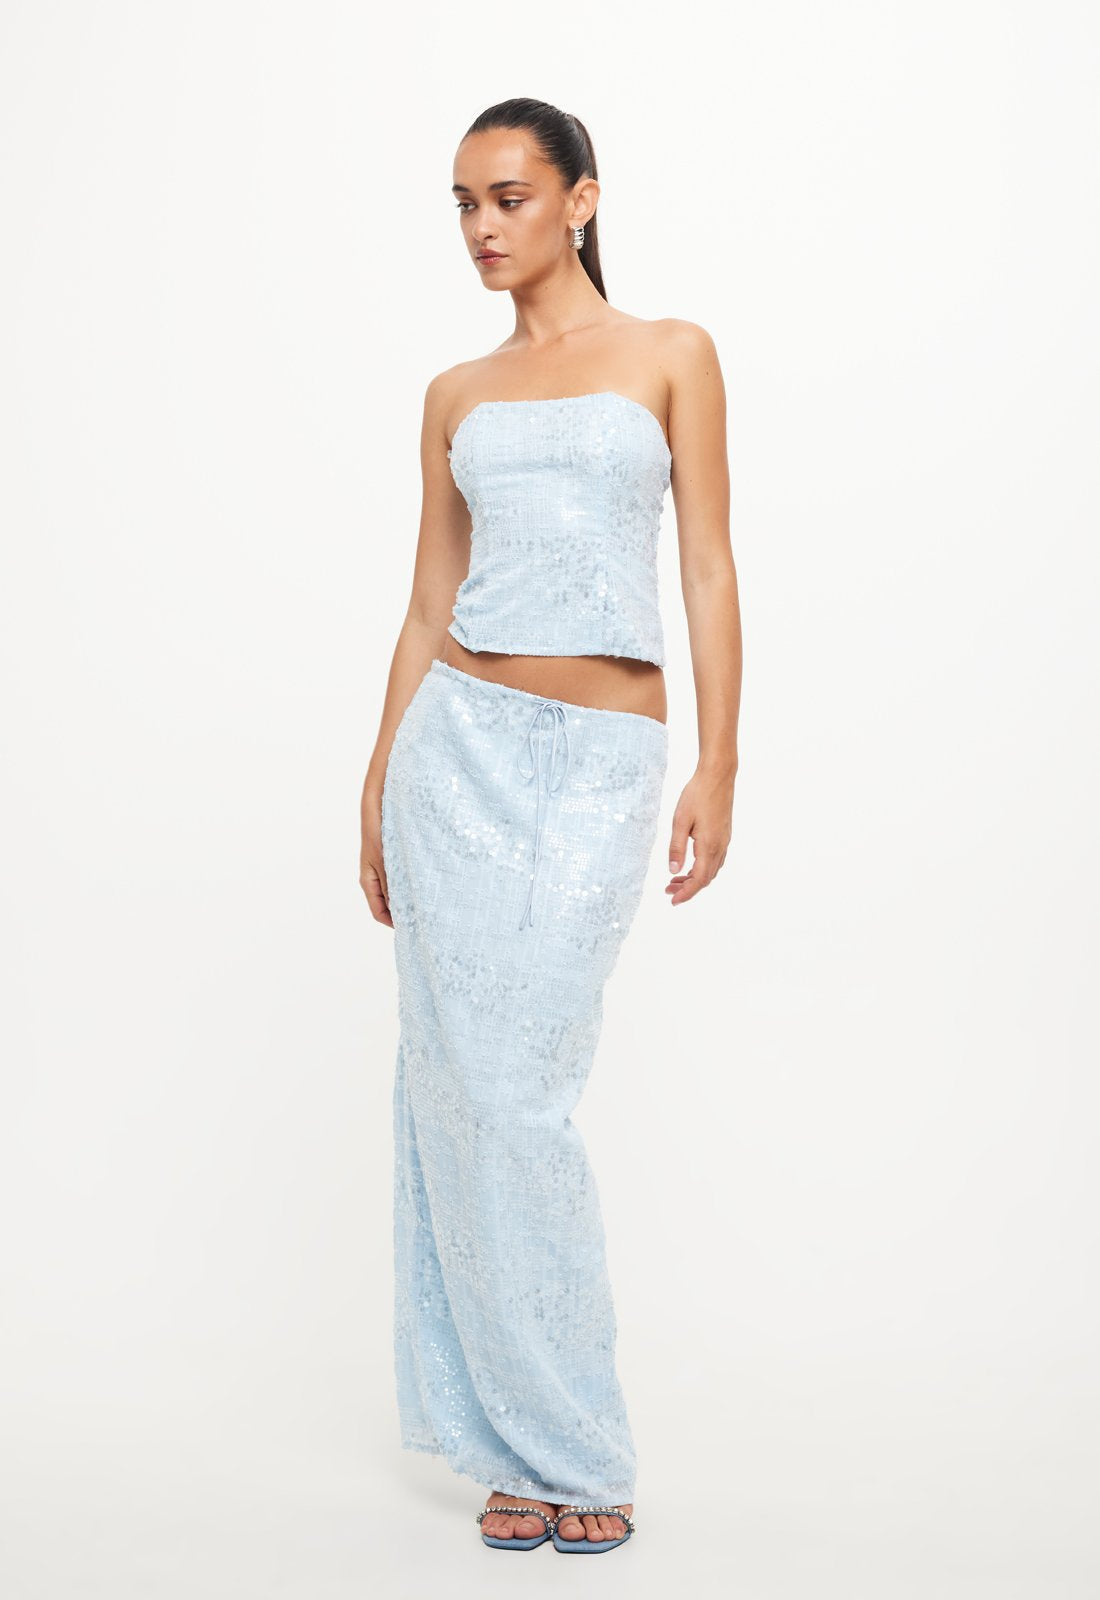 SHE'S ALL THAT STRAPLESS TOP - SKY BLUE